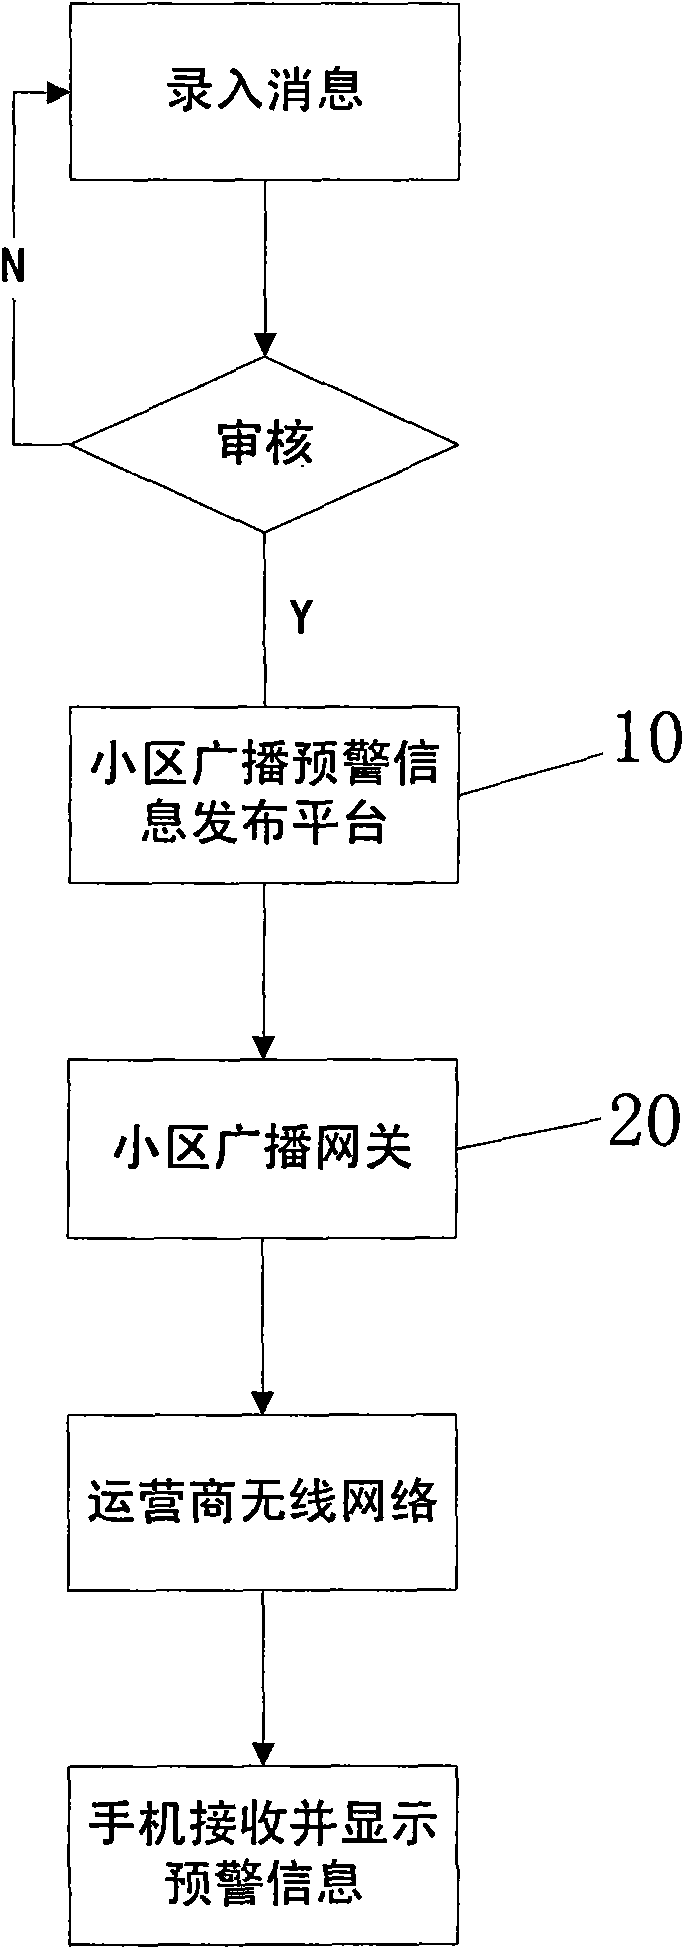 Method for realizing cell broadcast warning information by mobile communication network